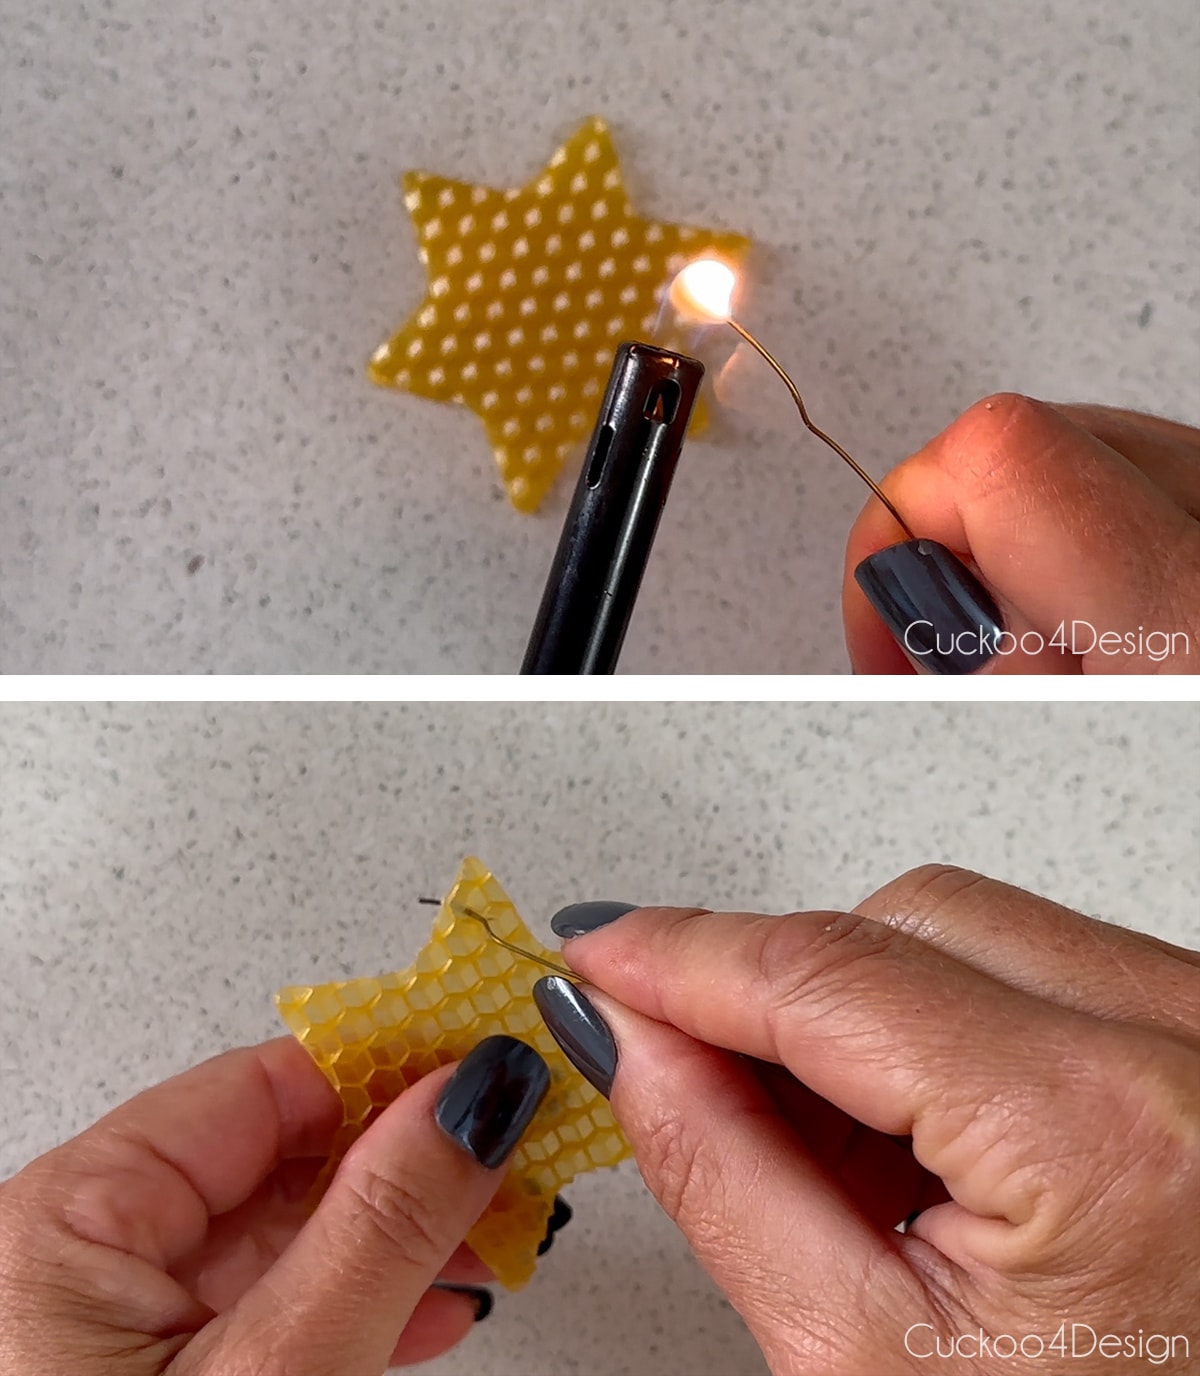 heating a wire to punch a hole into the wax ornamets